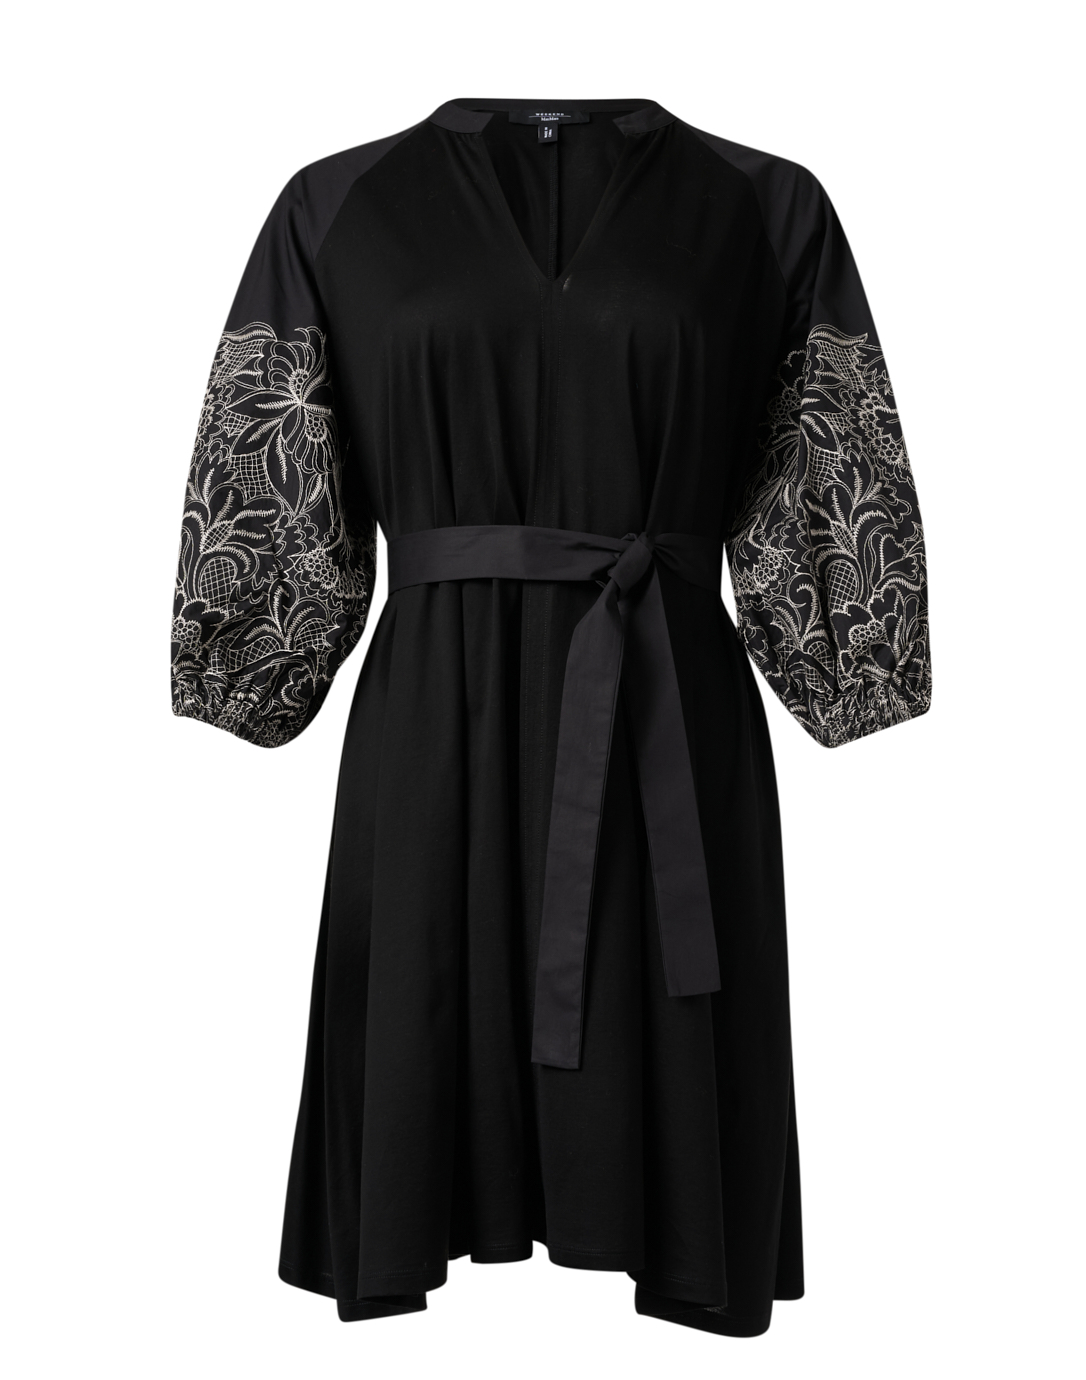 3/4 Sleeve Mara Concert Gown in Stretch Knit